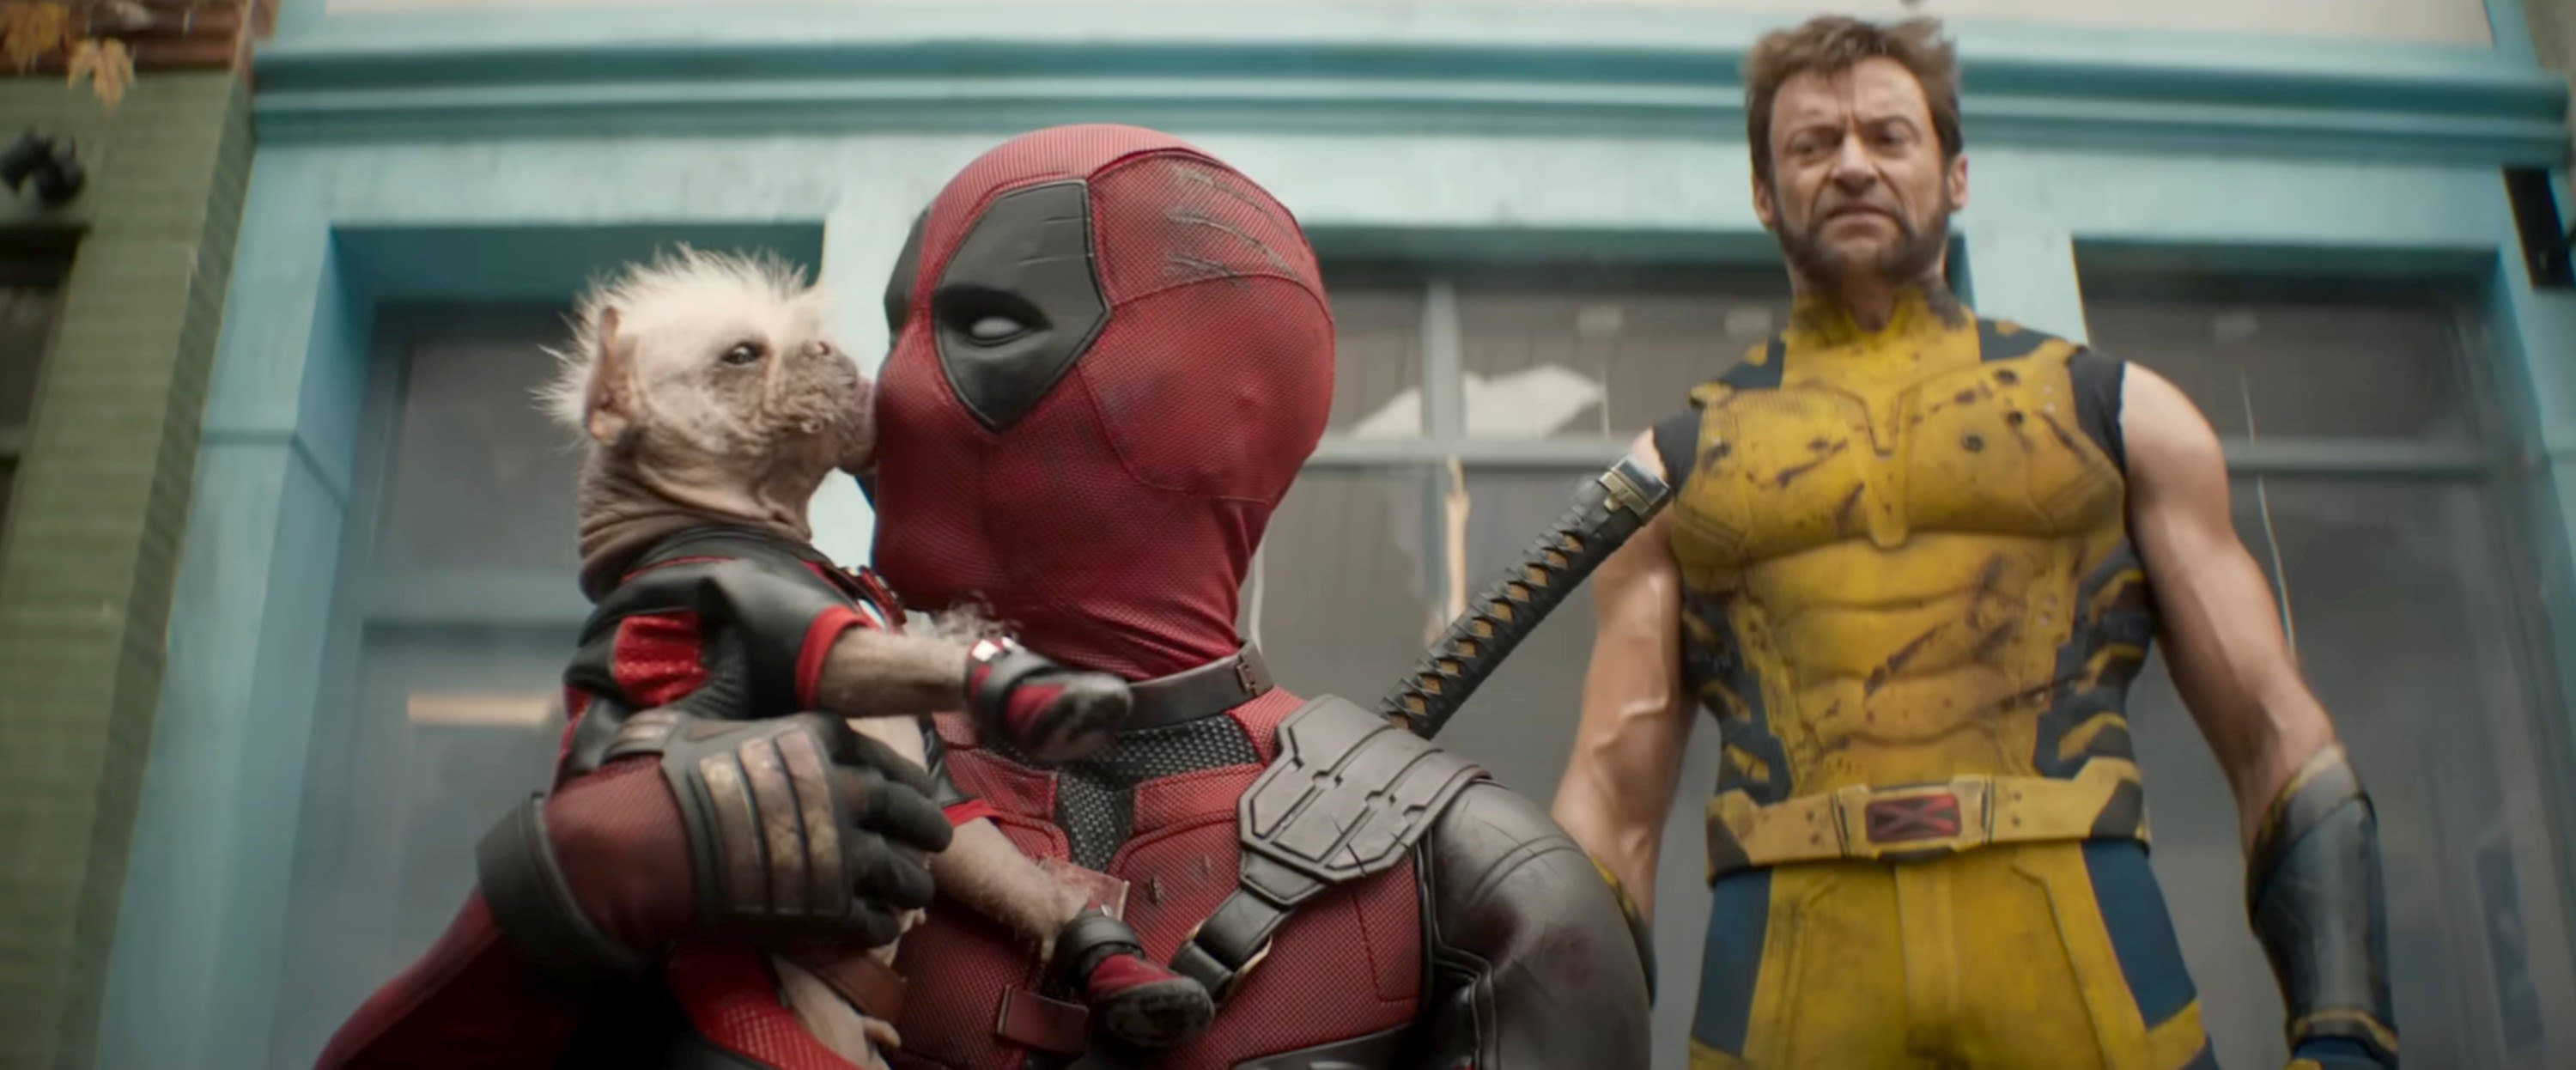 ‘Deadpool & Wolverine’ Soars To R-Rated Record Preview Of $38M+ Post Ryan Reynolds, Hugh Jackman Comic-Con Takeover – Friday...